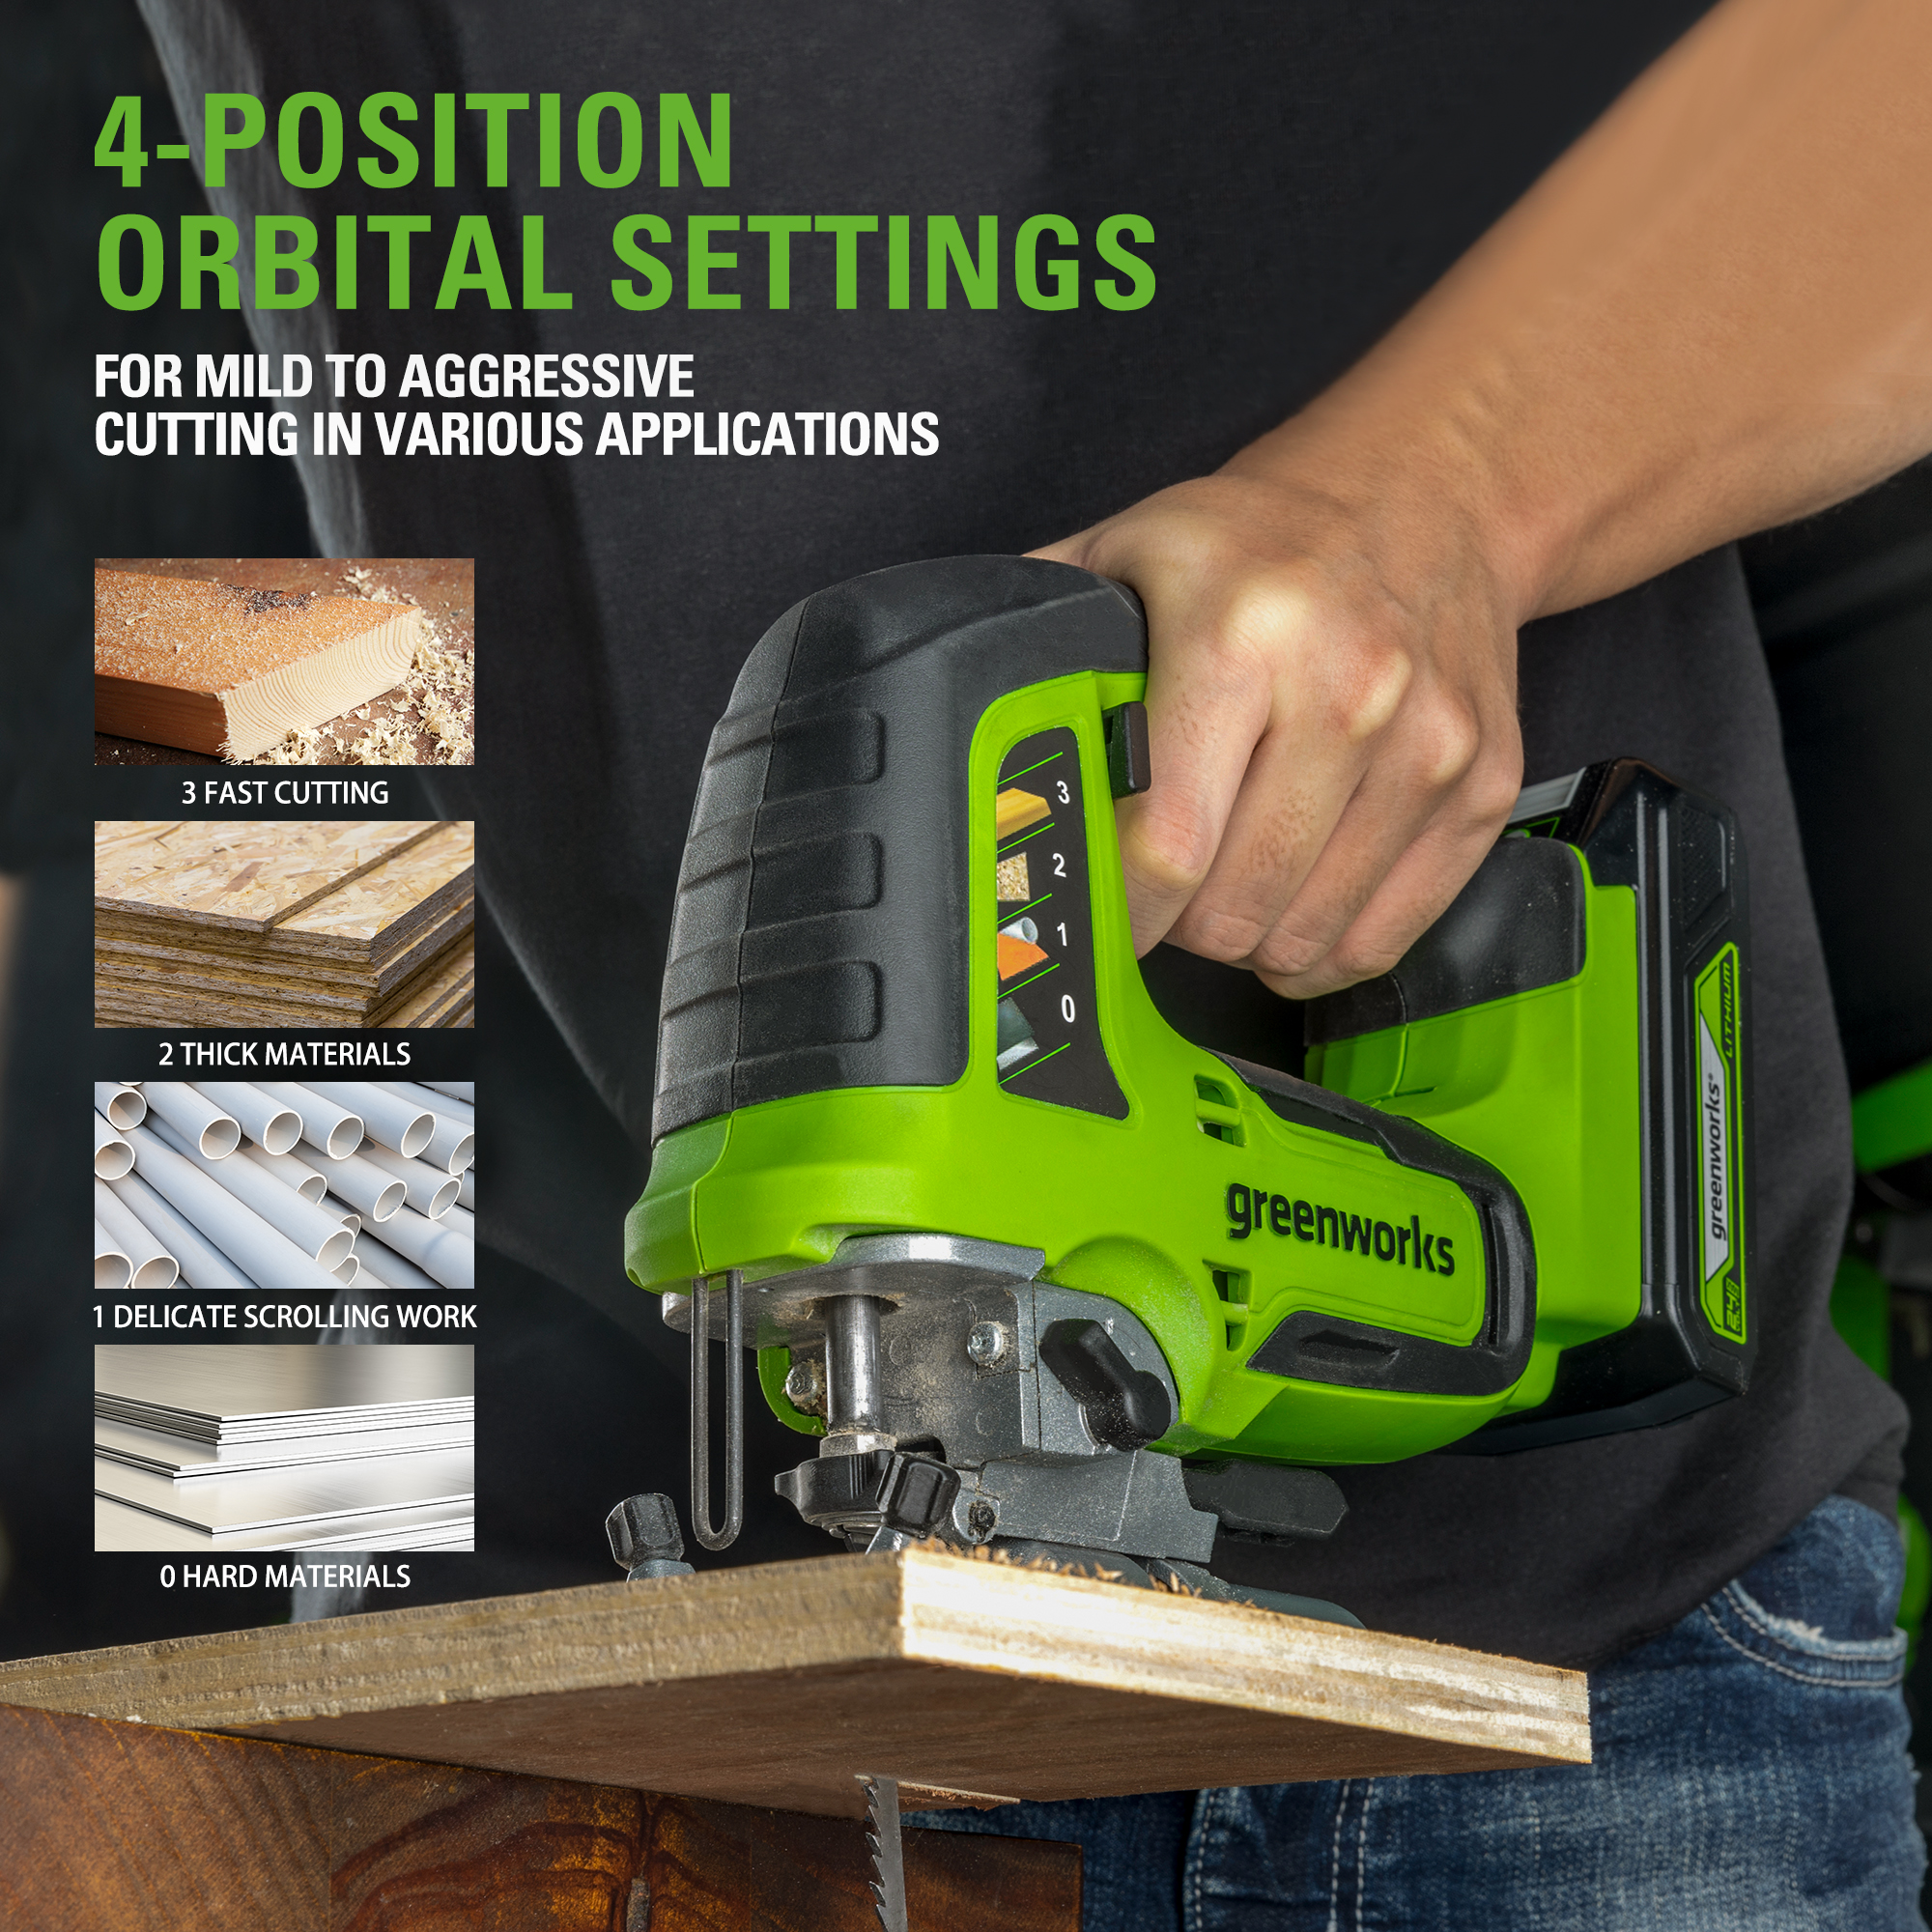 Greenworks New 24V Carpentry 3 Power Tool, Brushless Drill Driver Combo Kit with Two 2Ah Batteries & Charger - image 5 of 7